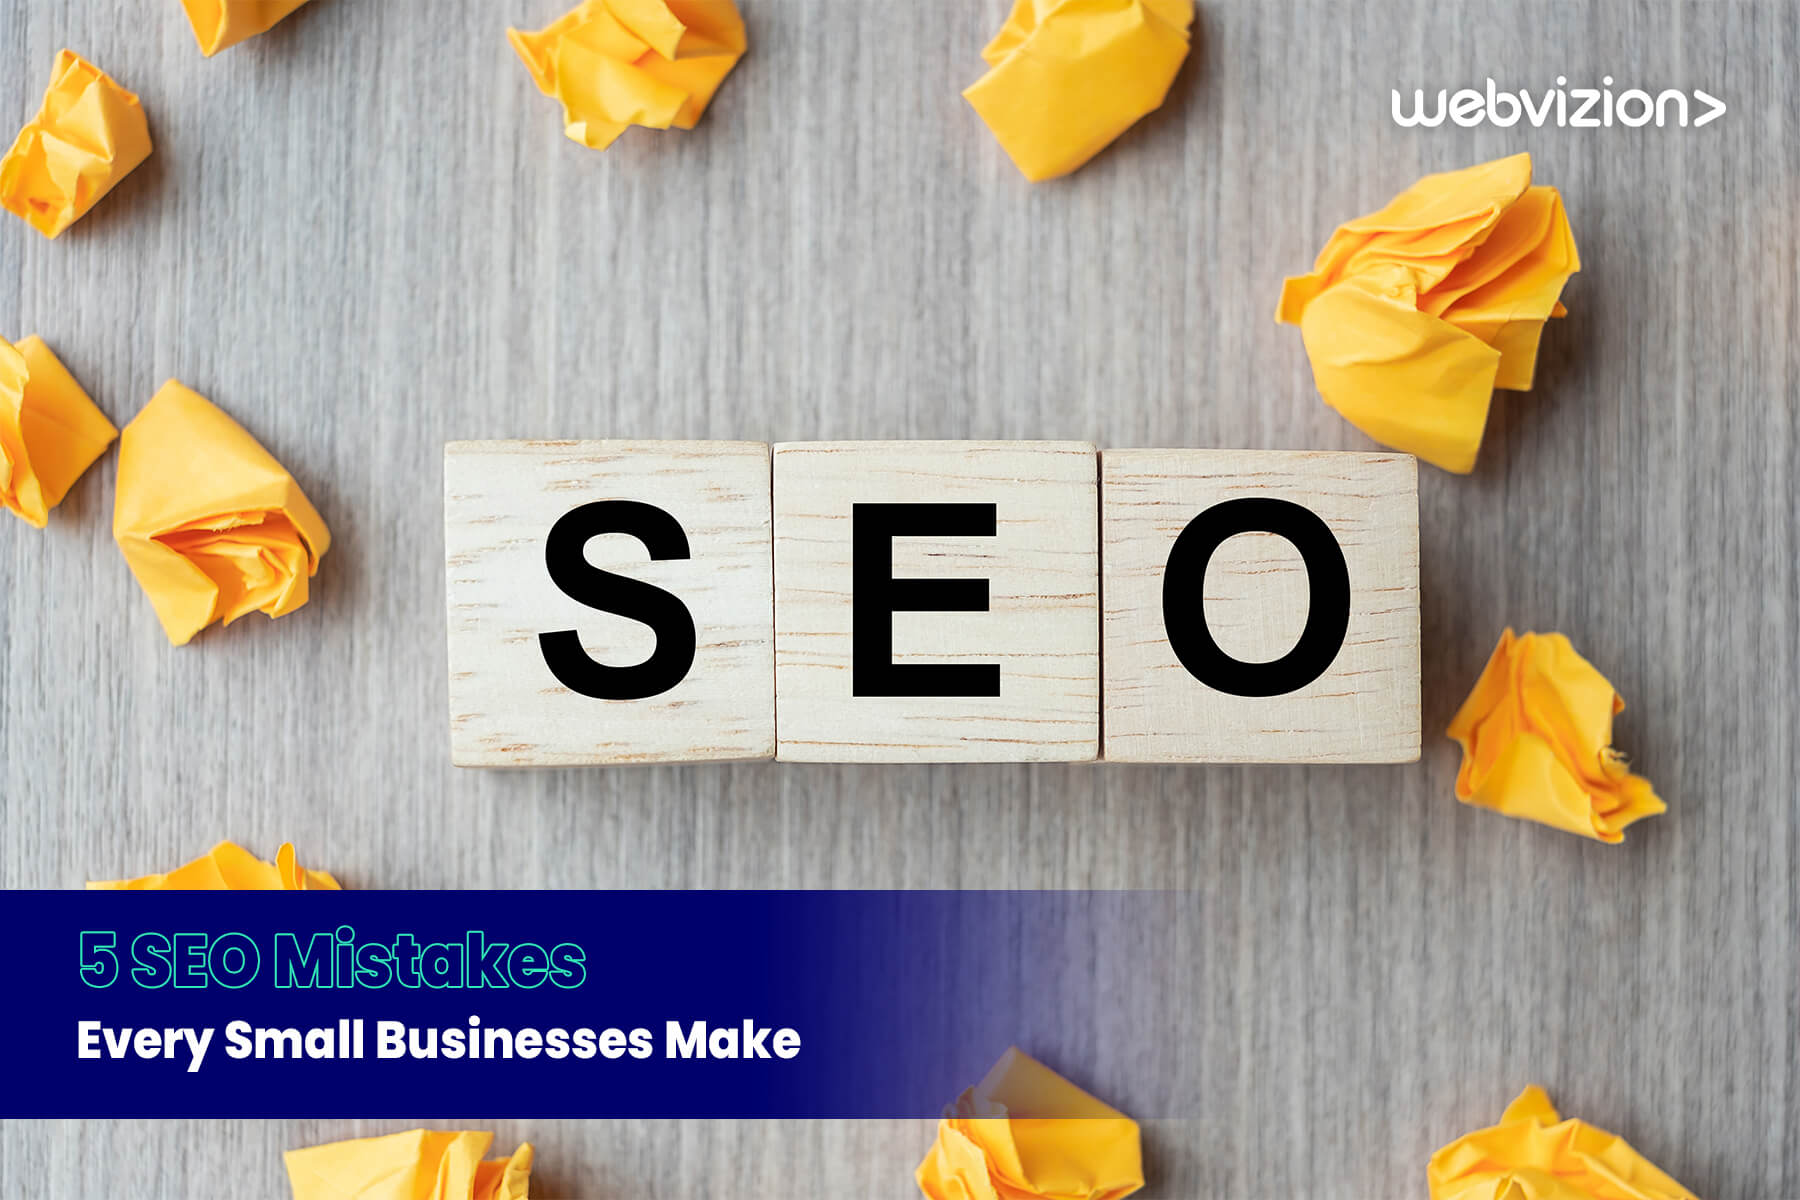 5 SEO Mistakes Every Small Businesses Make